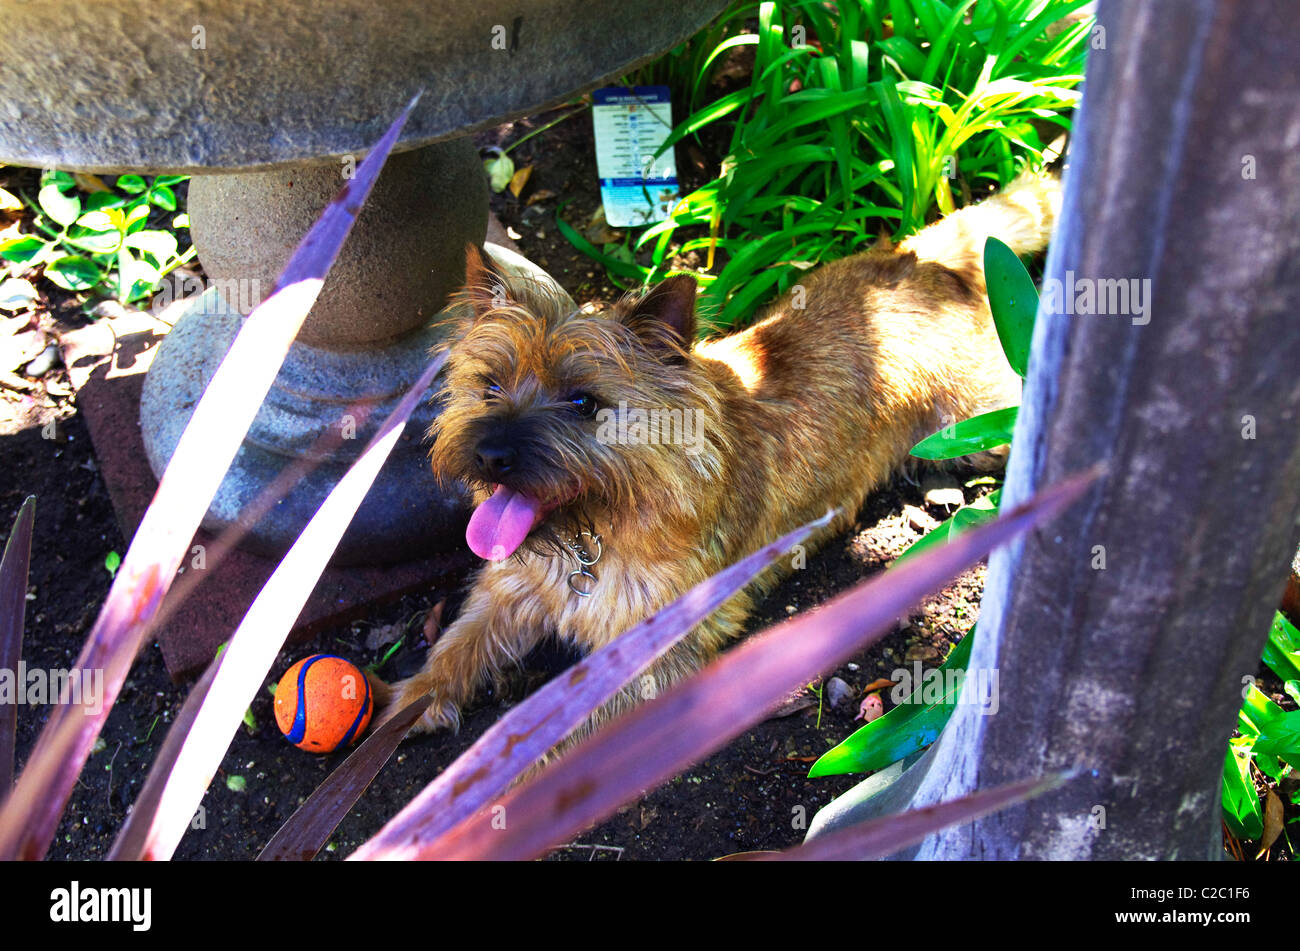 A cairn terrier puppy waits in the shade for his ball to be thrown. Stock Photo